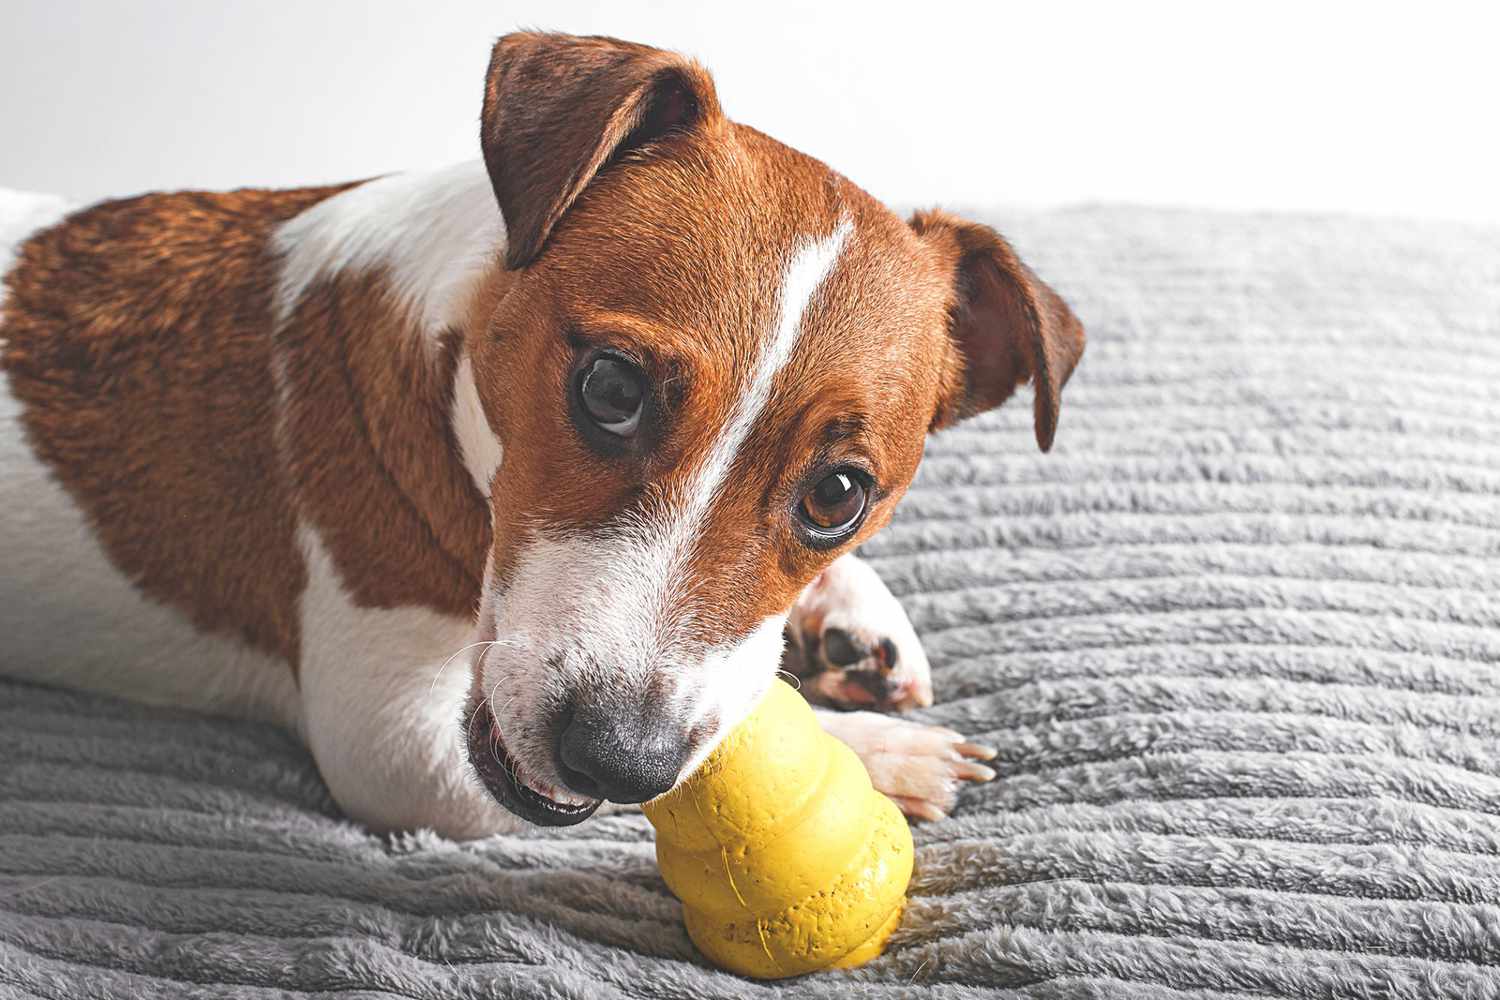 Jack Russell dog with a Kong toy